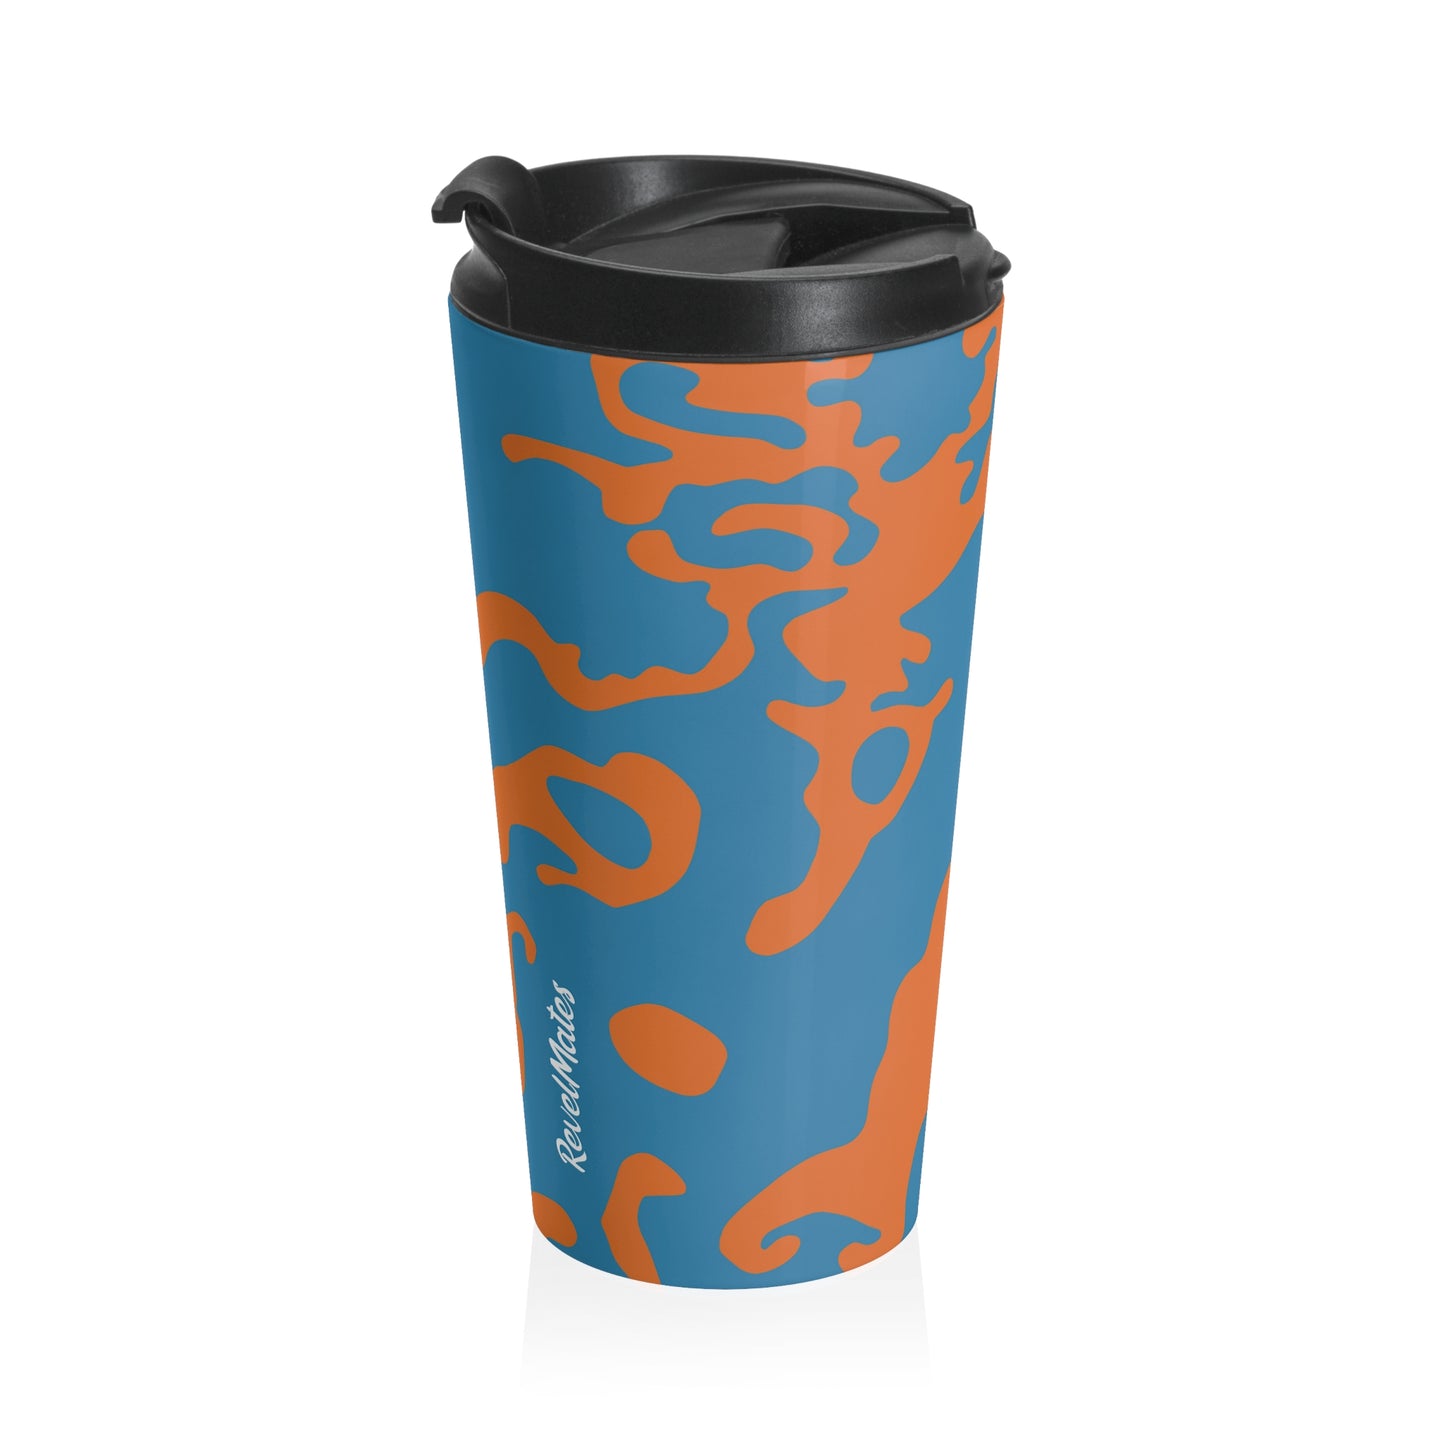 Stainless Steel Travel Mug With Cup 15oz (440ml) | Camouflage Blue & Orange Design